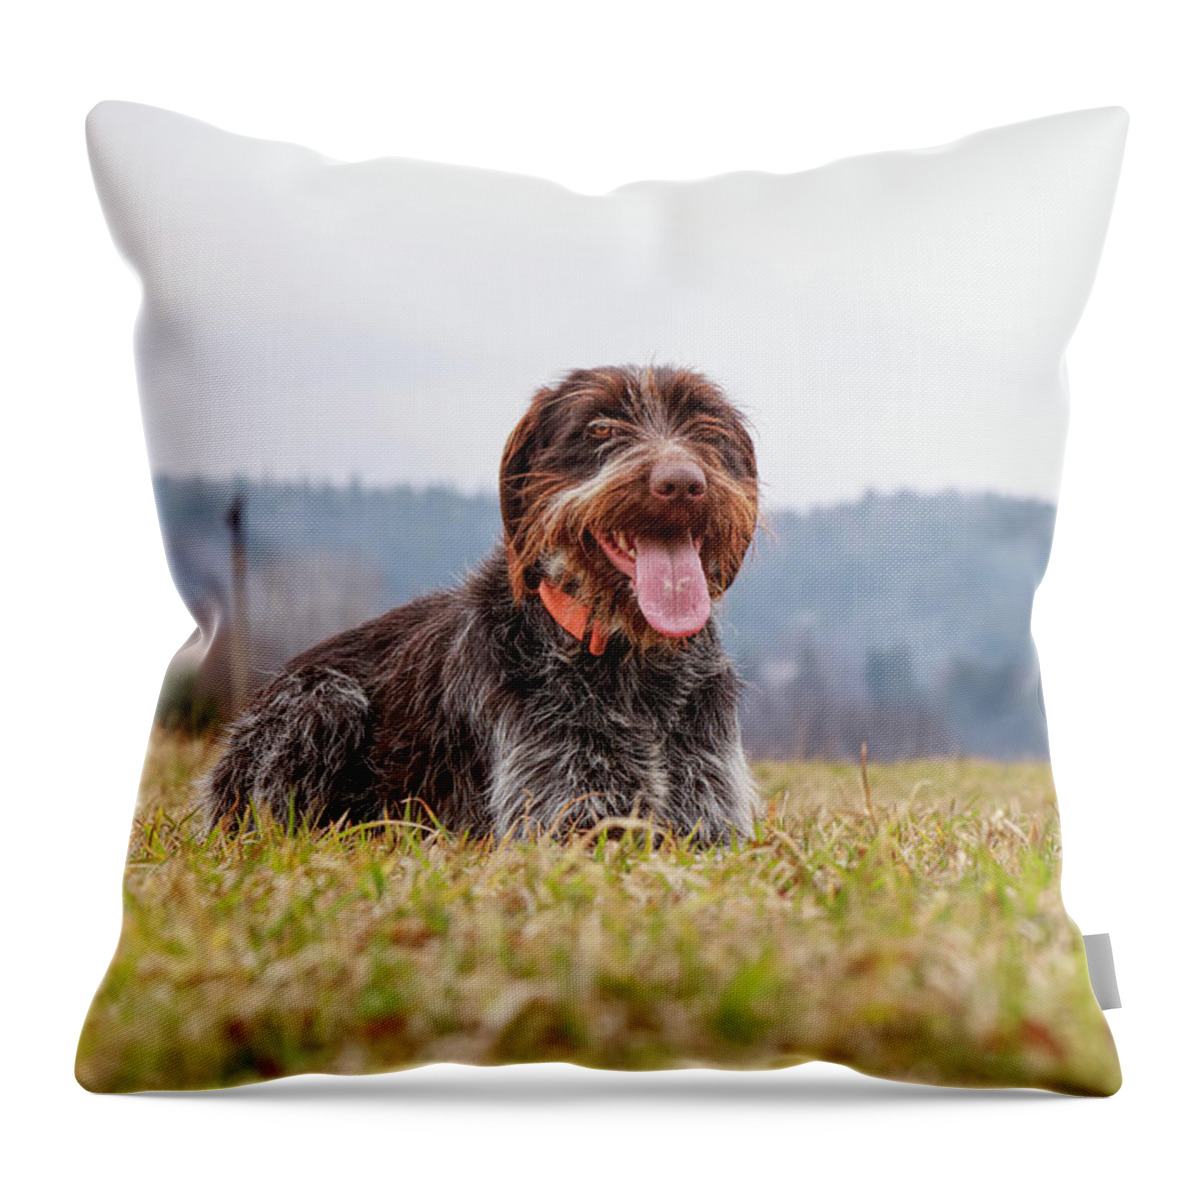 Bohemian Wire Throw Pillow featuring the photograph Bohemian Wire is relaxing by Vaclav Sonnek